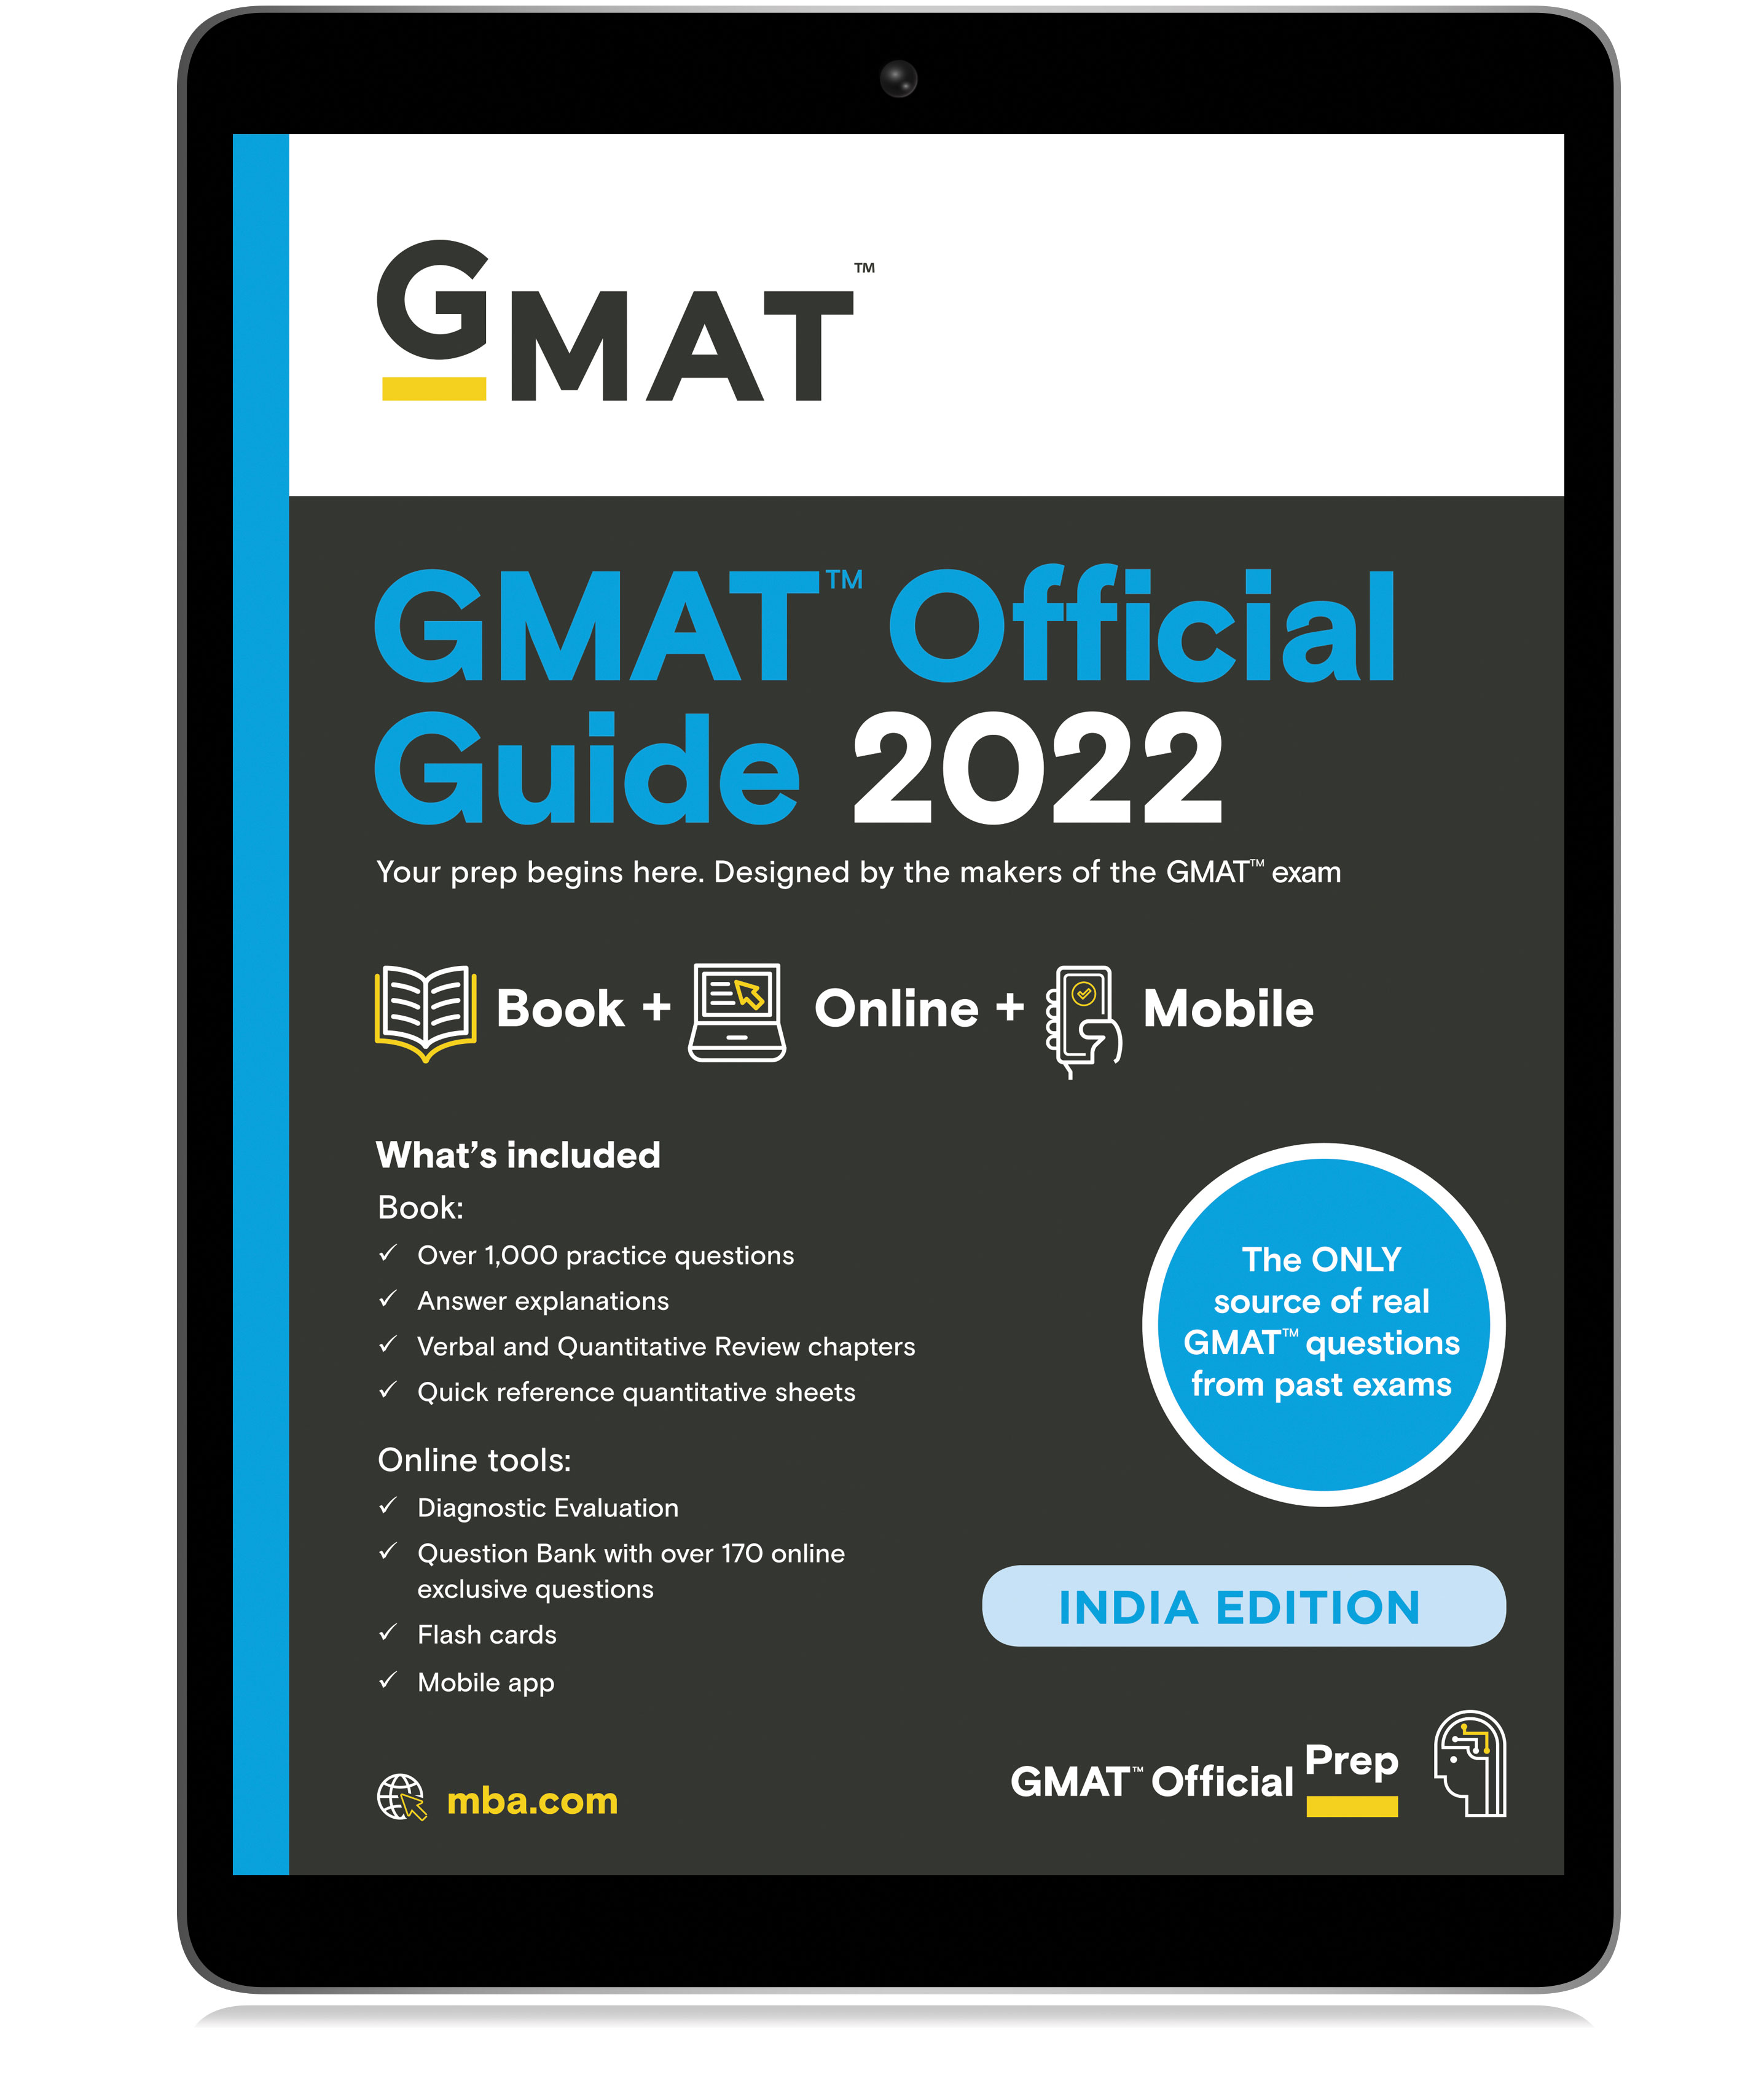 Wiley India The Official Guide for GMAT™ Exam Review 2022